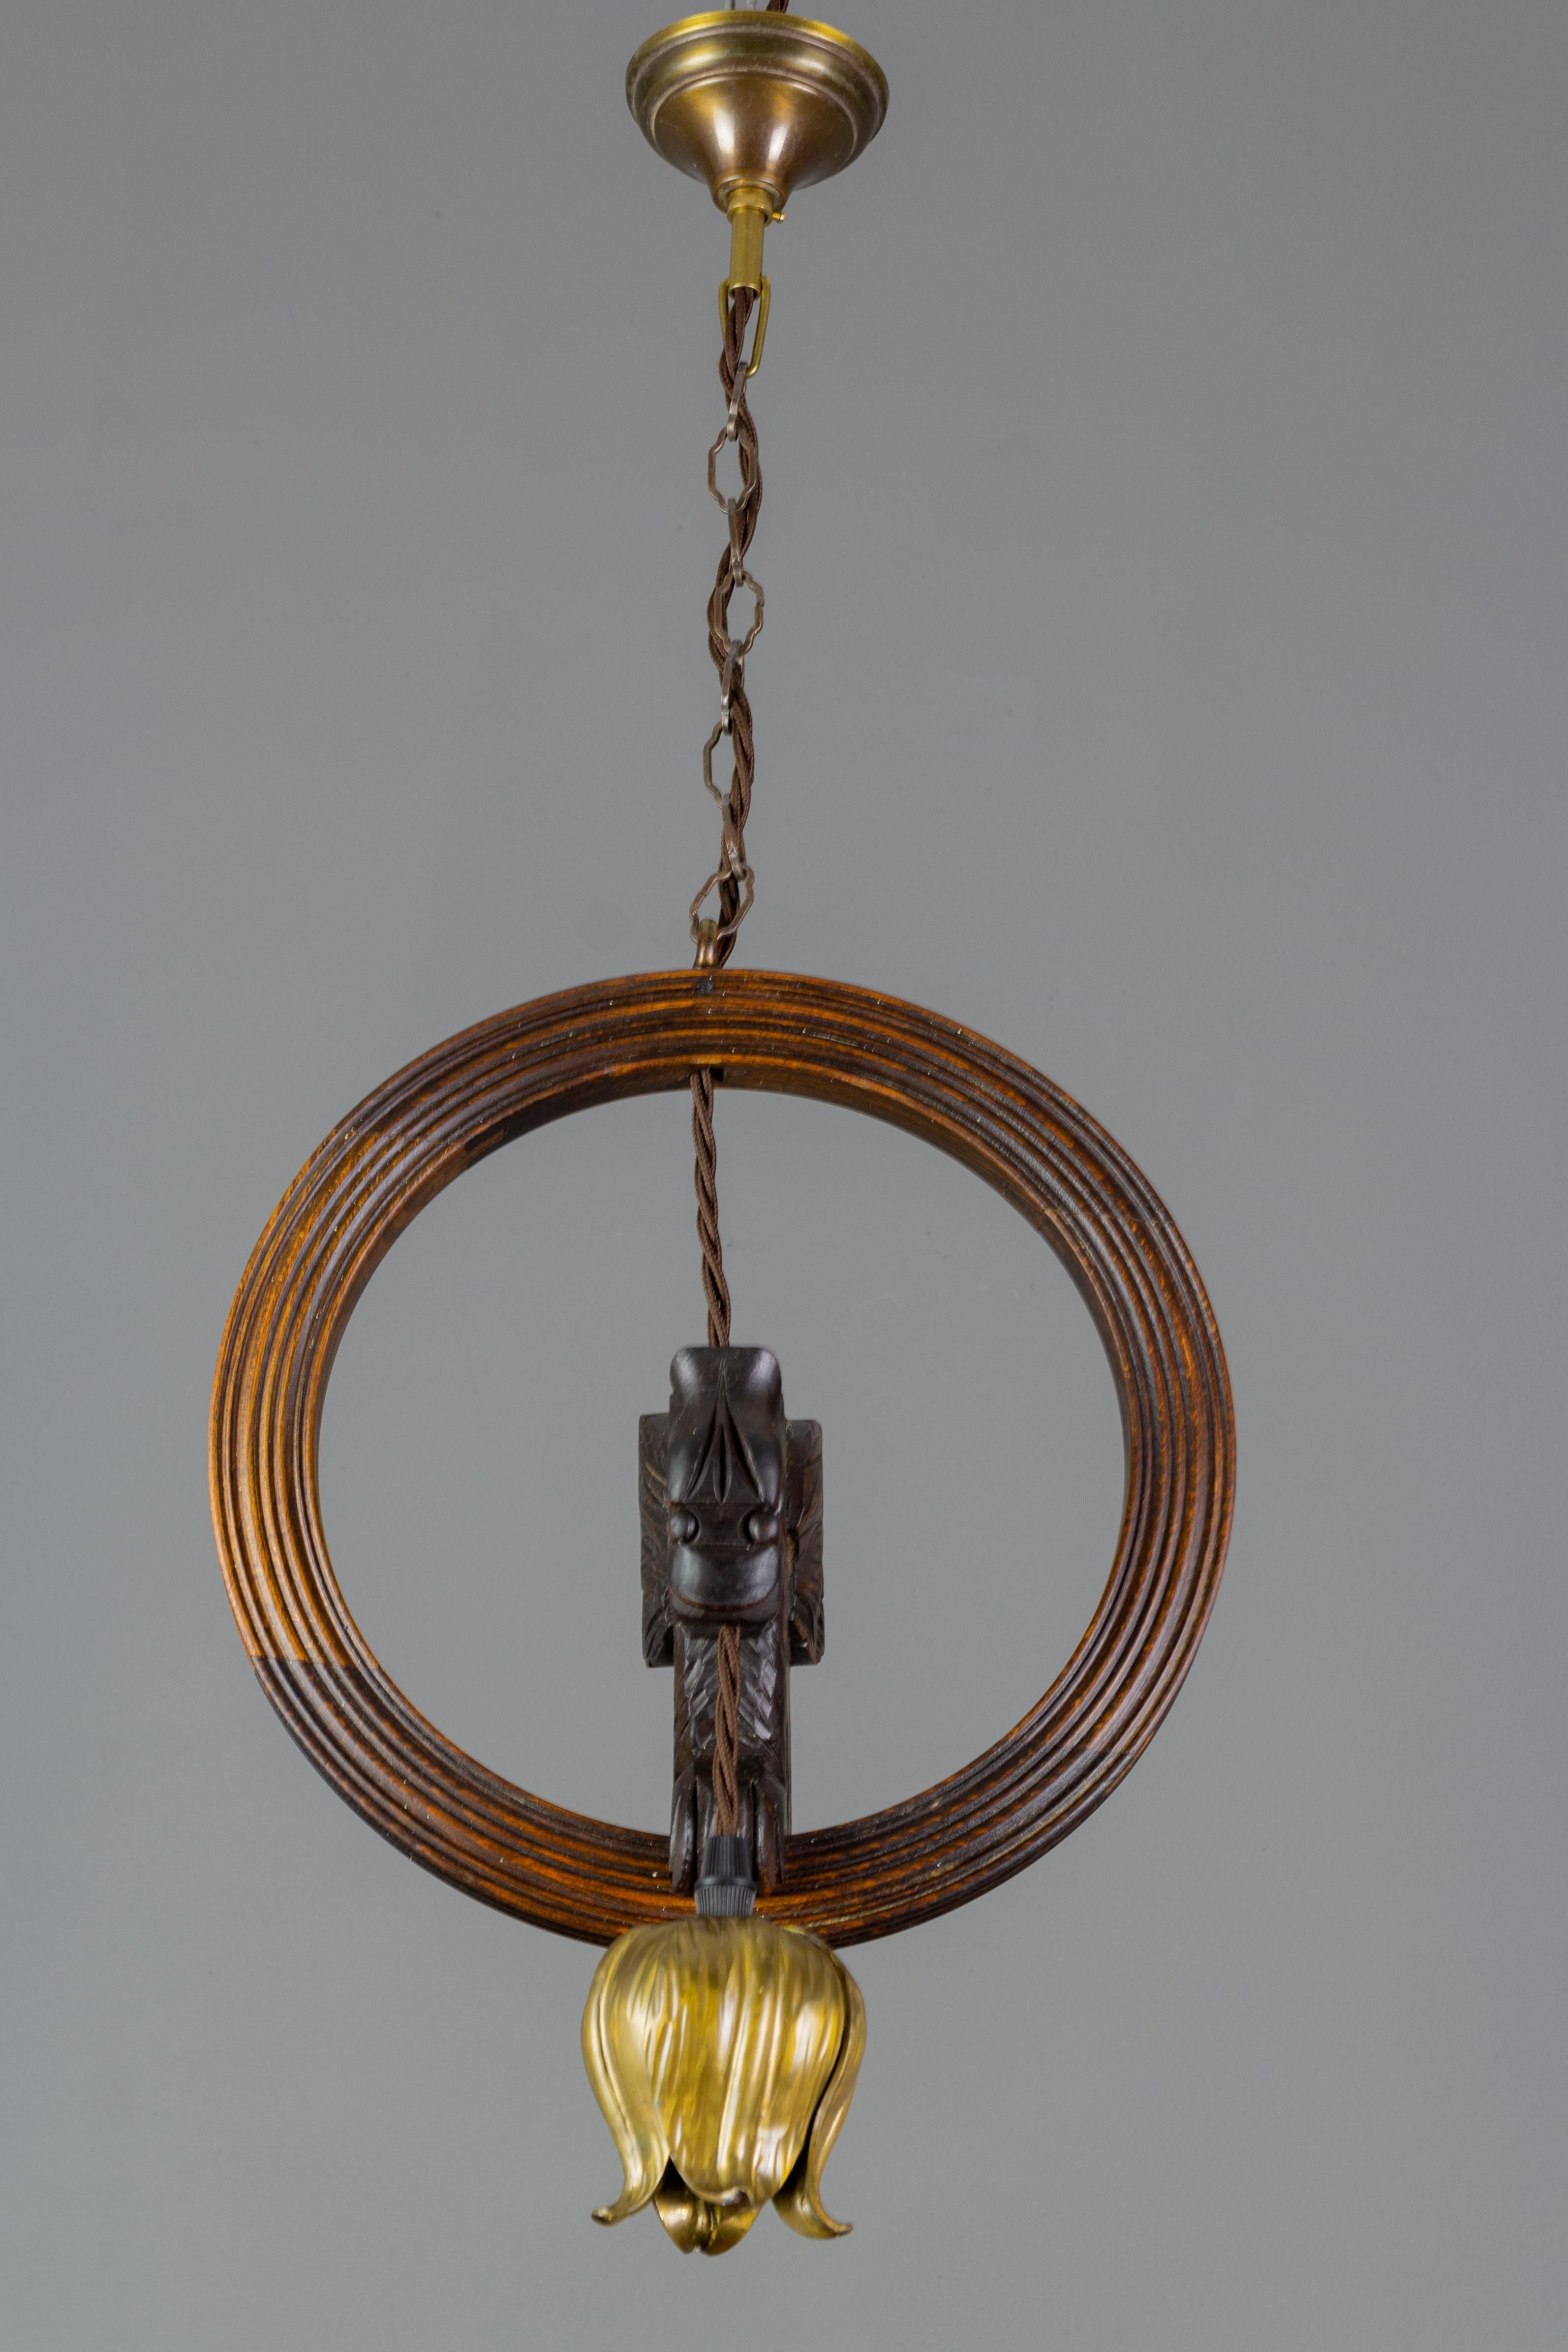 Mid-20th Century French Vintage Wooden and Brass Pendant Light with Bird Figure